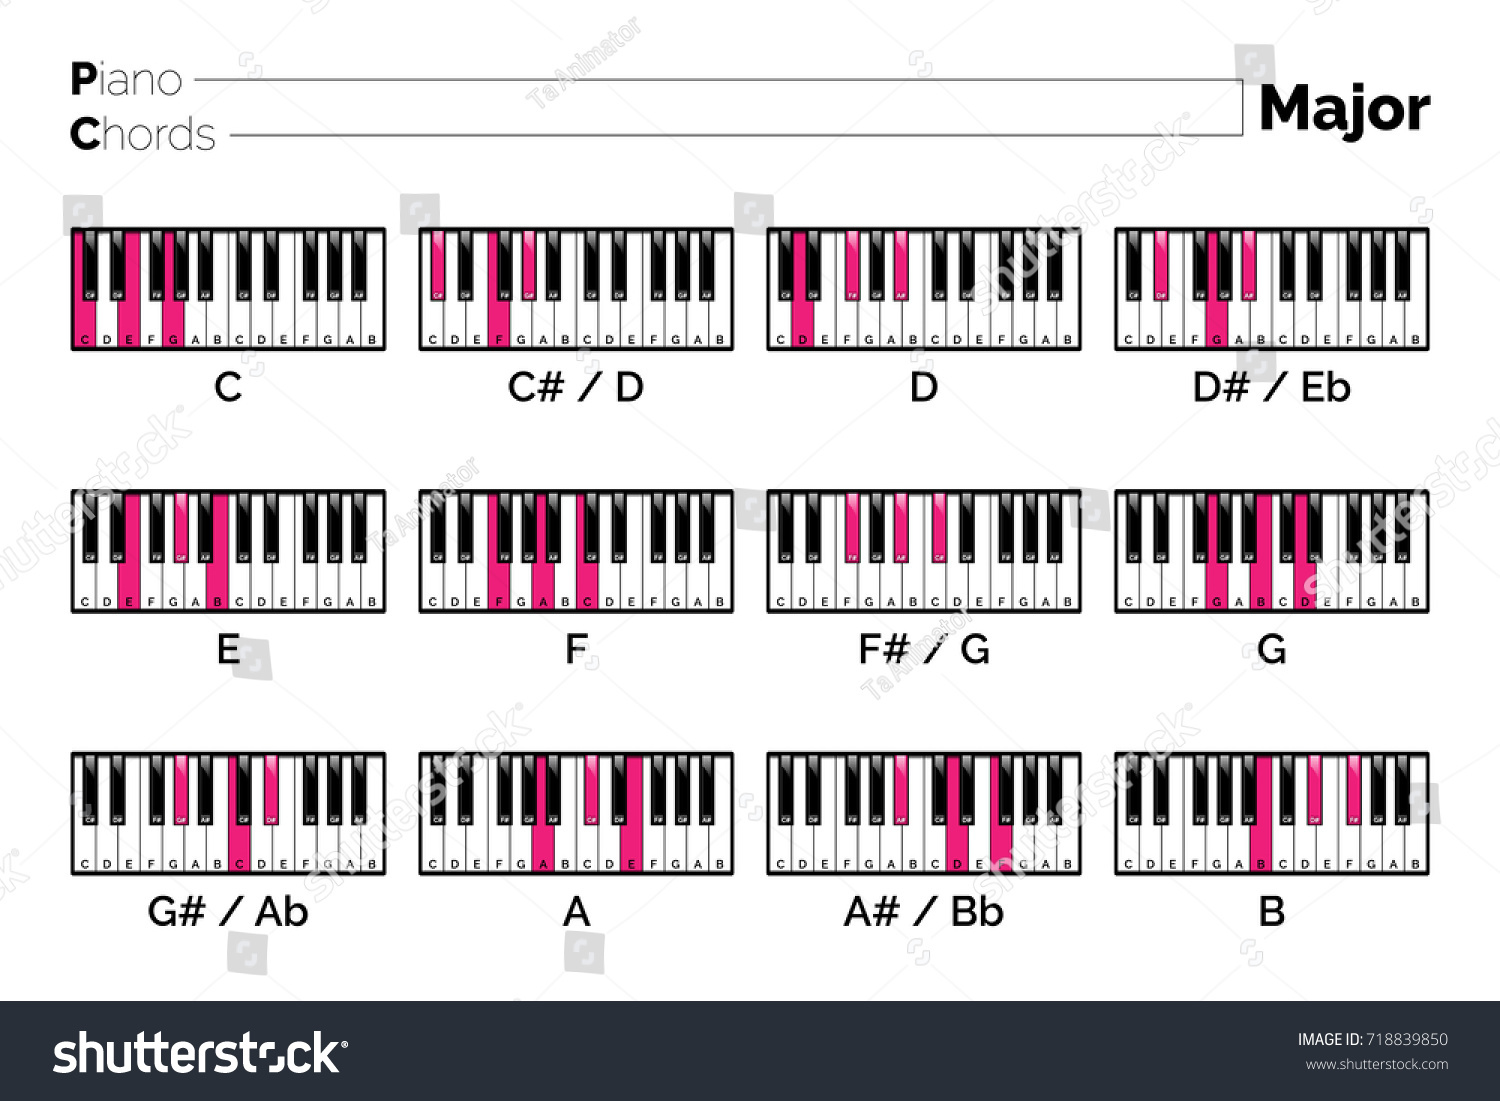 Piano Chord 7sus4 Chart Graphic Music Stock Vector Royalty Free